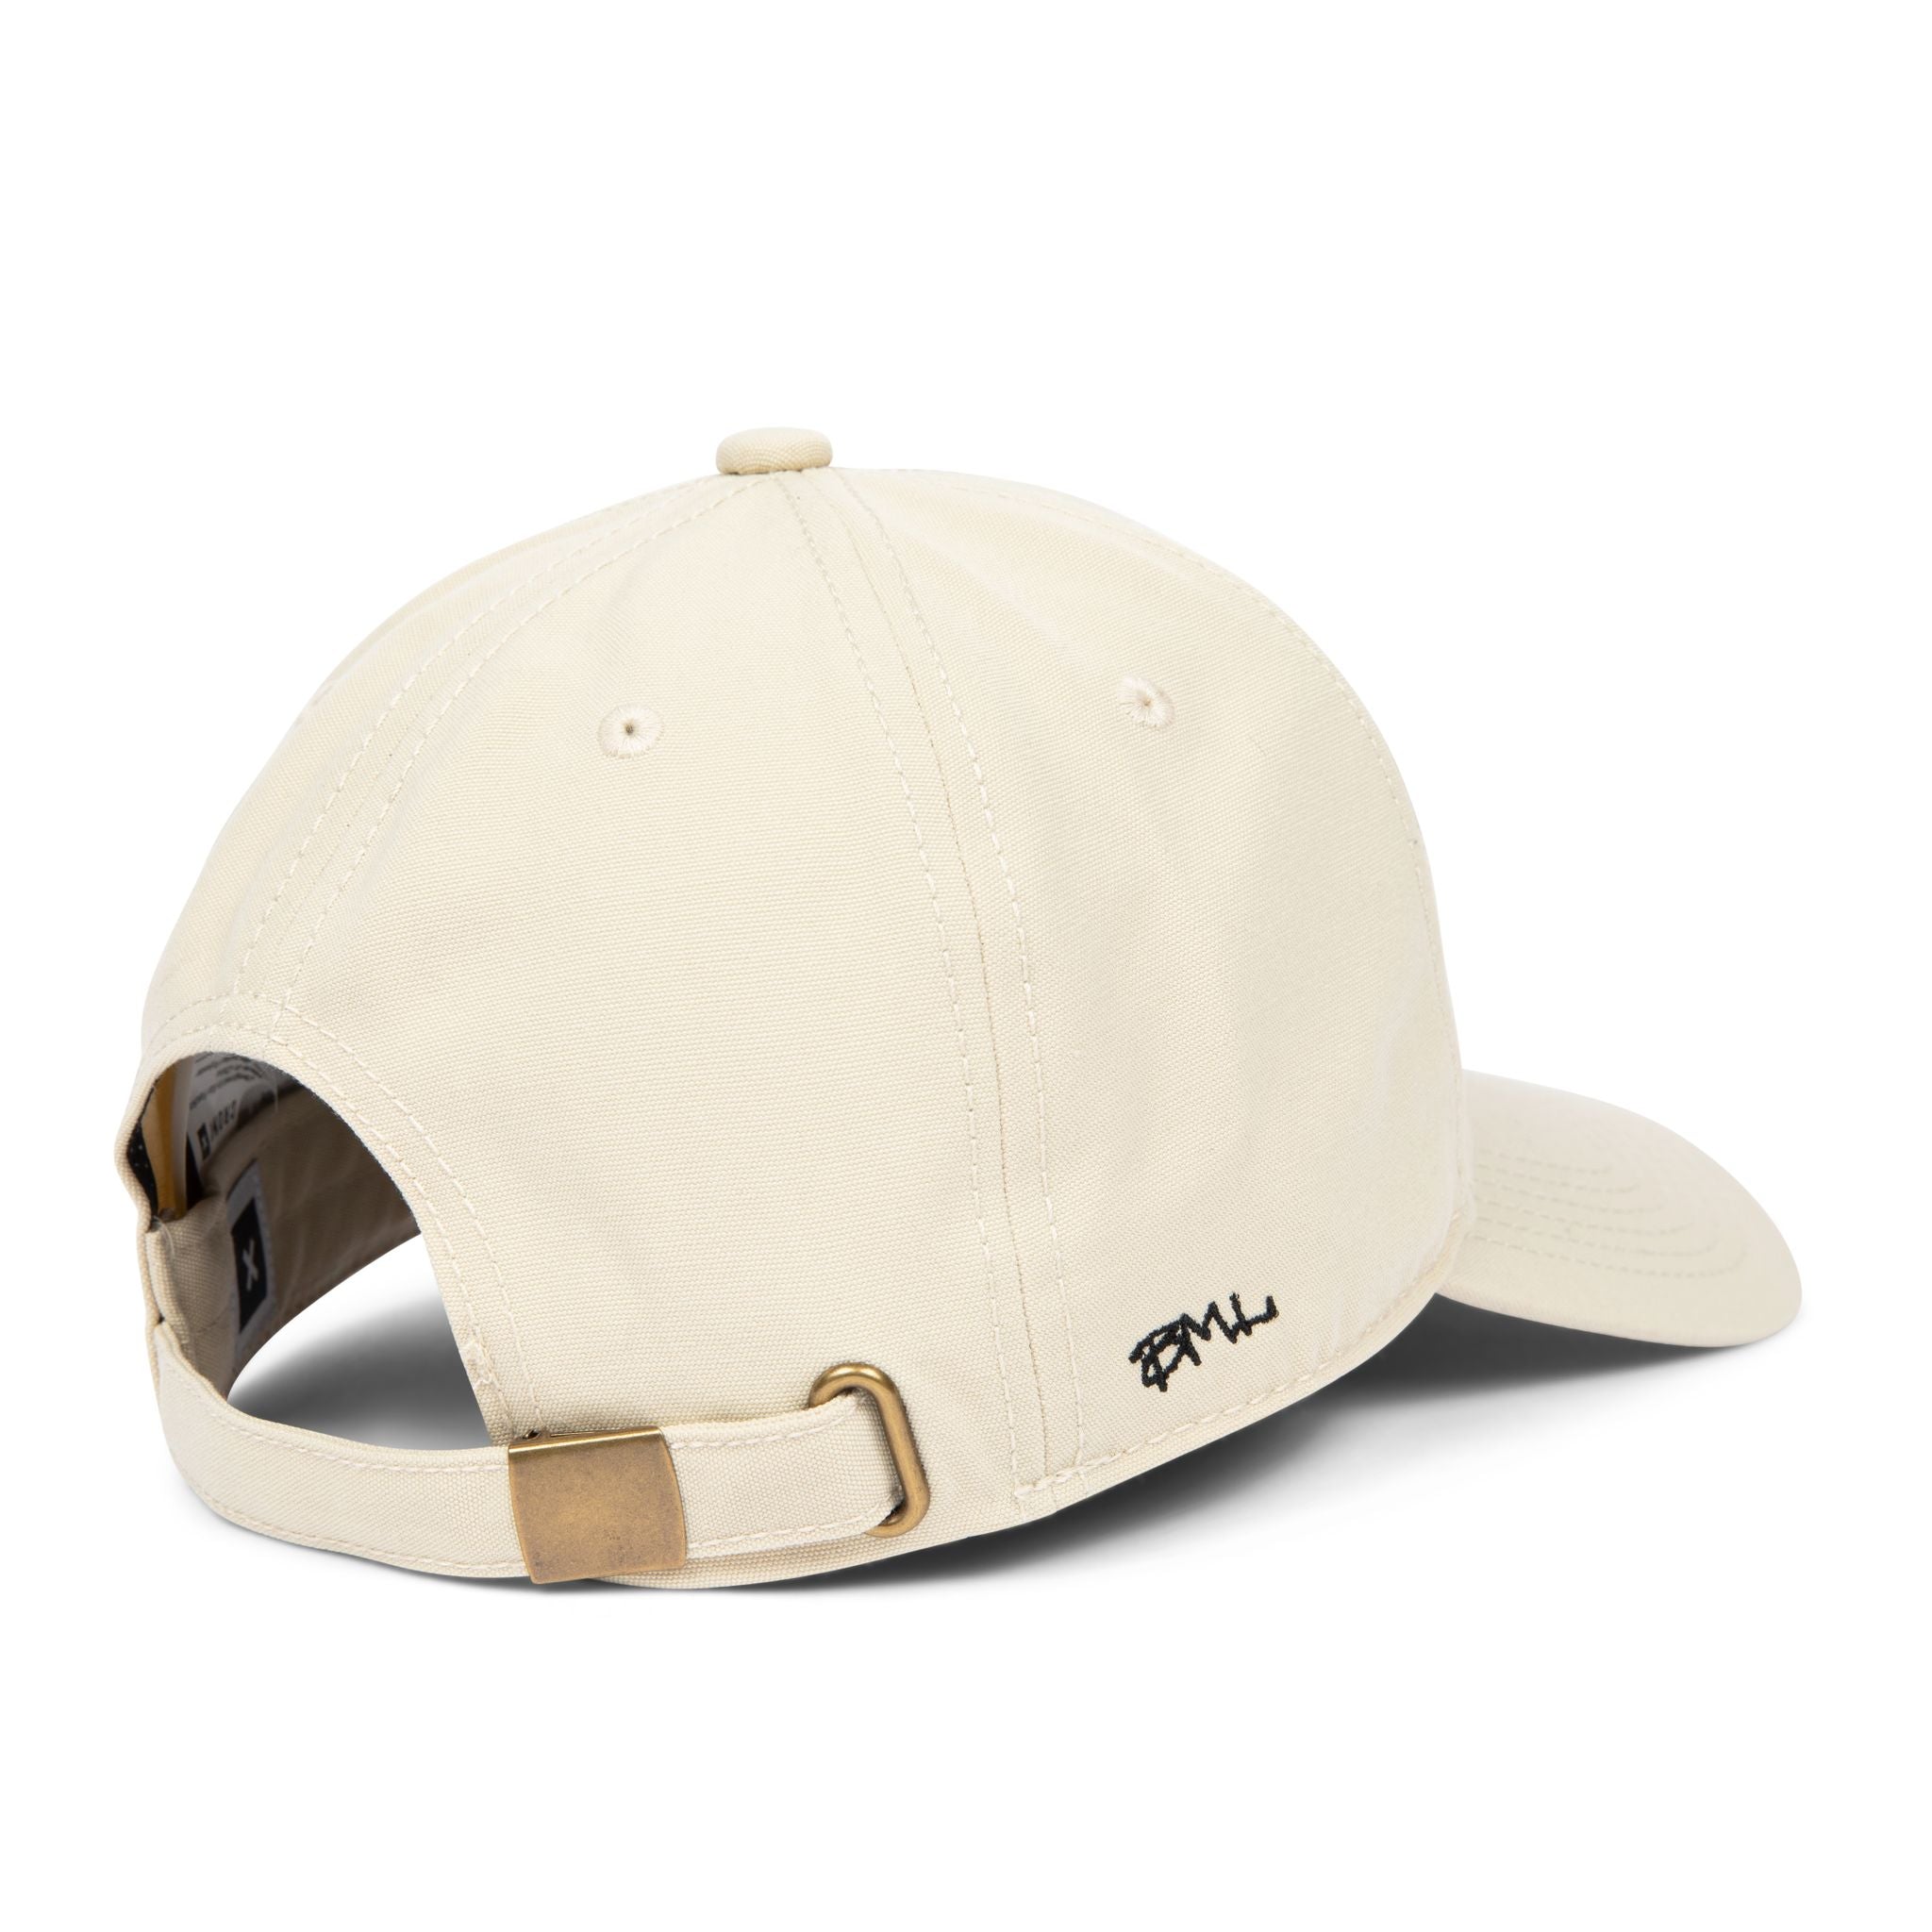 Do Not Pick Them - Recycled Dad Hat